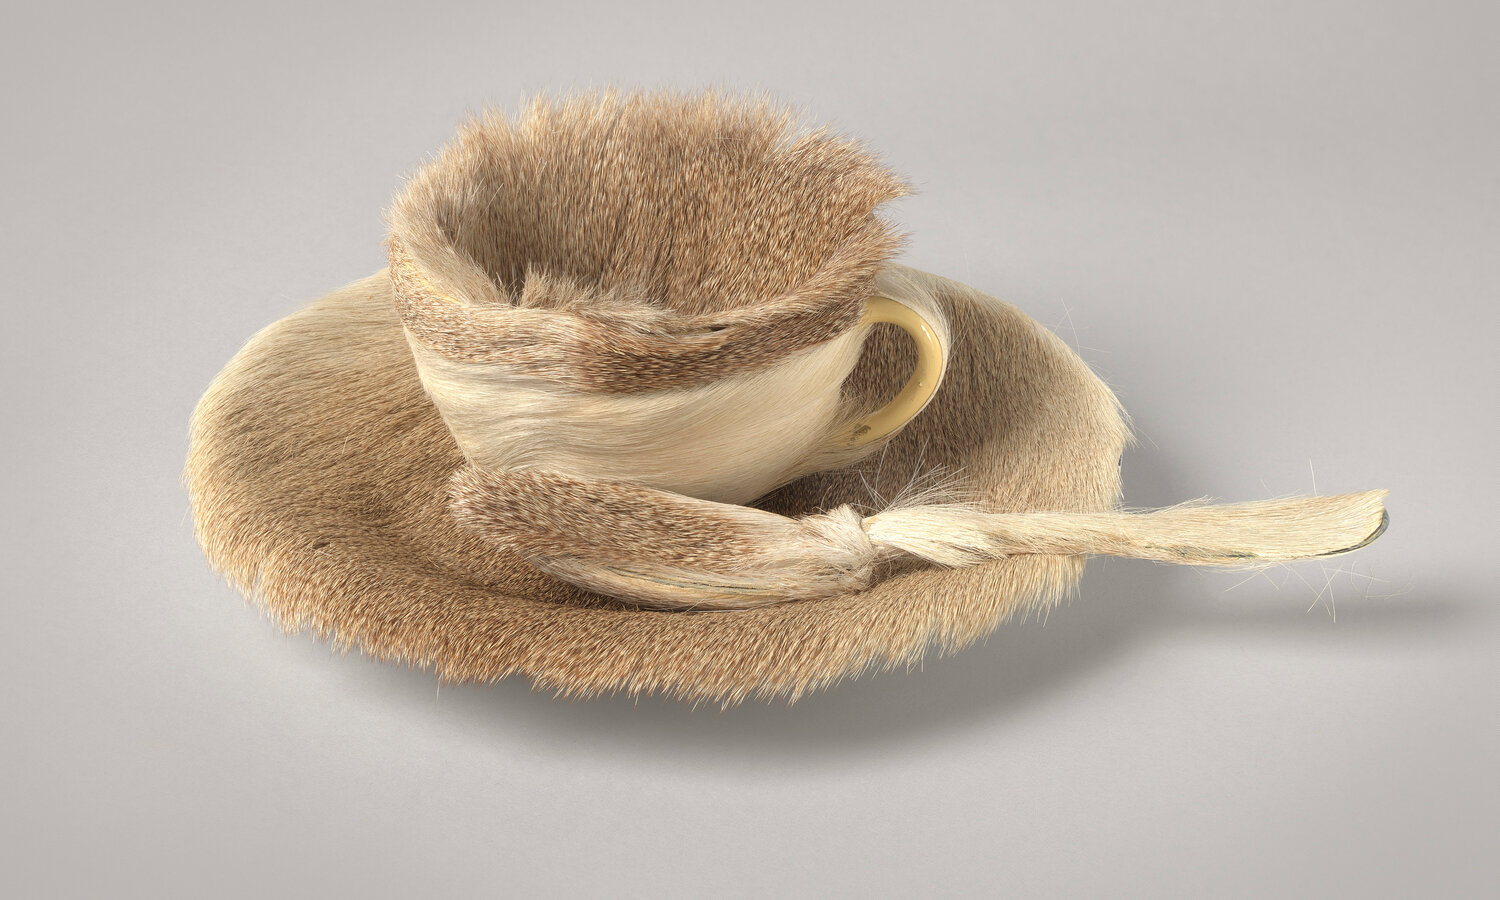 Méret Oppenheim, Object (Le Déjeuner en fourrure), Paris, 1936,Fur-covered cup, saucer, and spoon, cup 4-3/8 inches in diameter; saucer 9-3/8 inches in diameter; spoon 8 inches long, overall height 2-7/8" (The Museum of Modern Art)